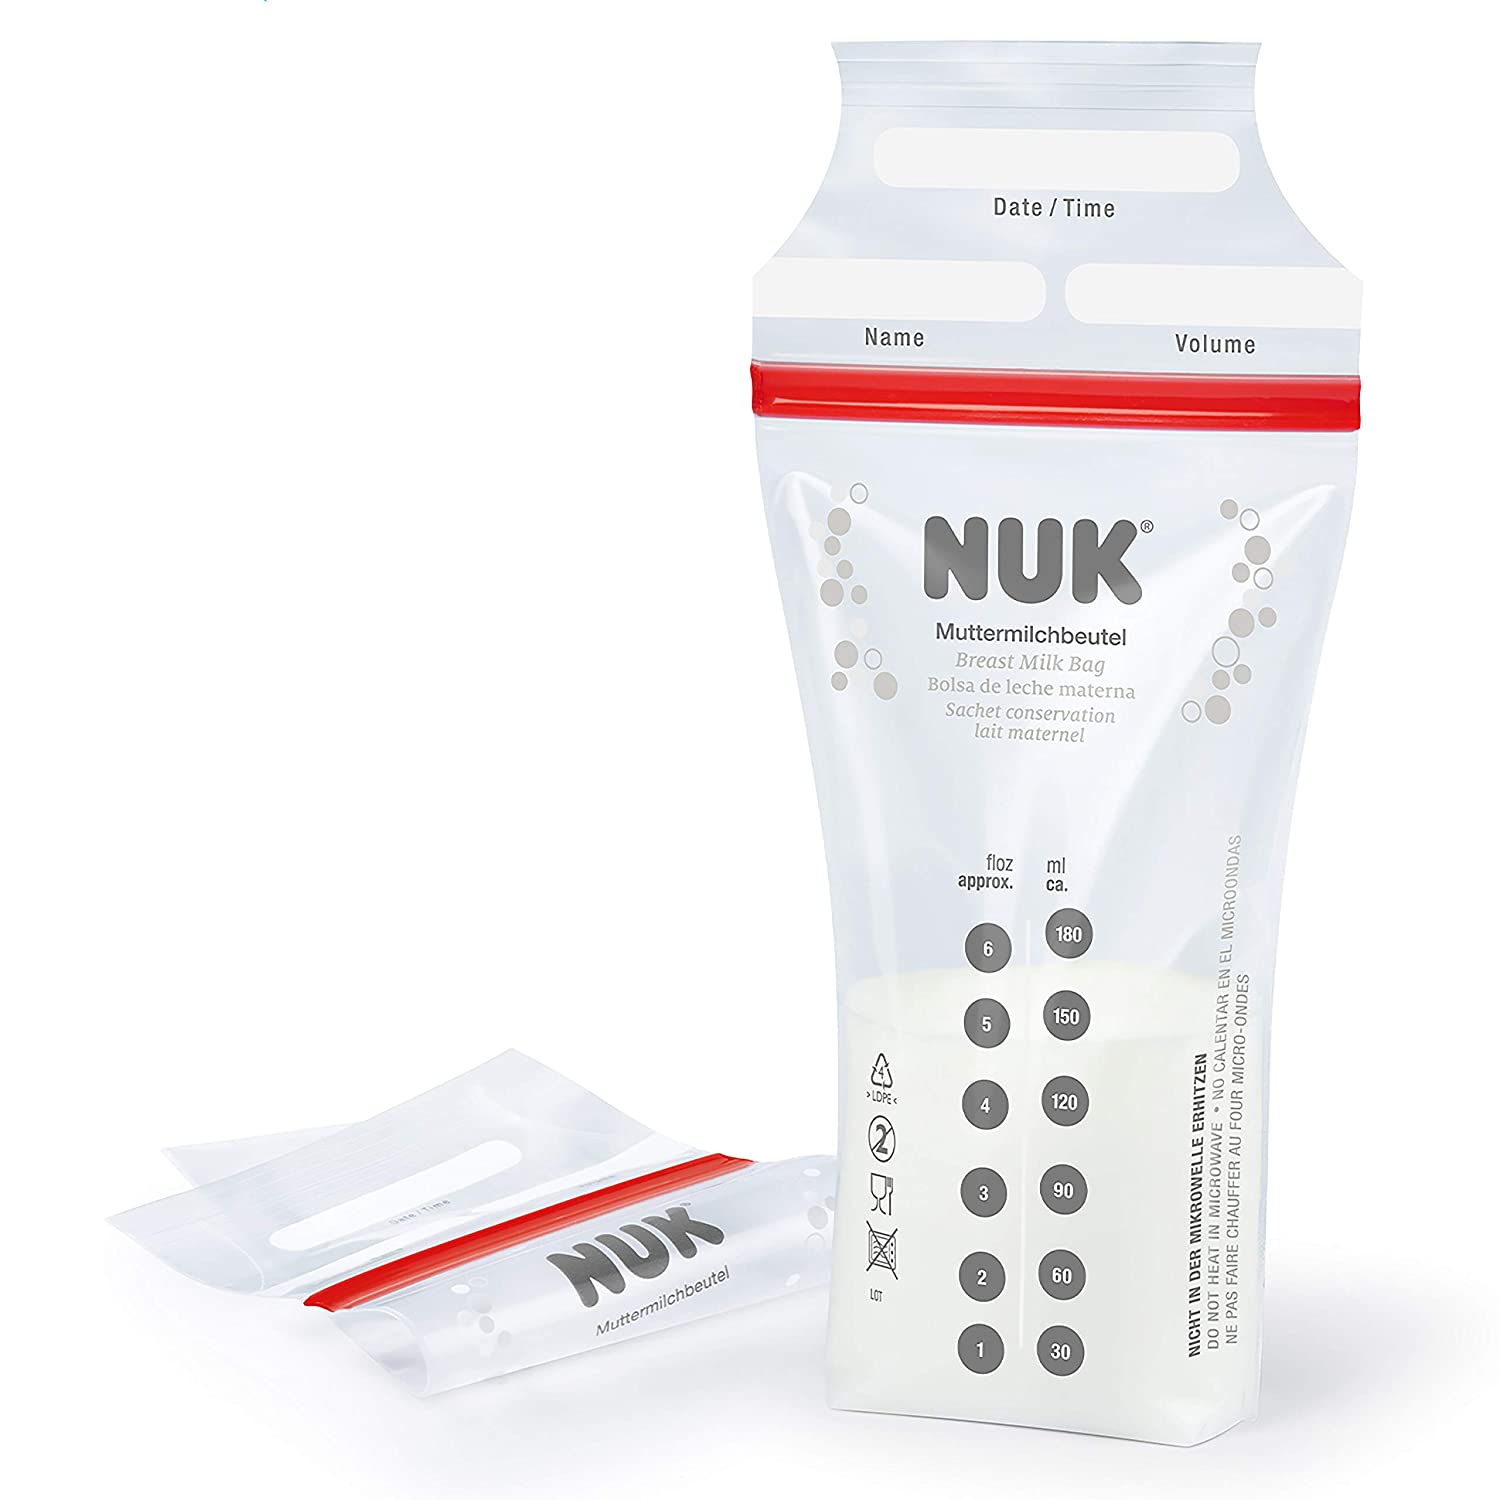 NUK Breast Milk Bags Space Saving & Ready to Use 180ml (Pack of 25) - Clear